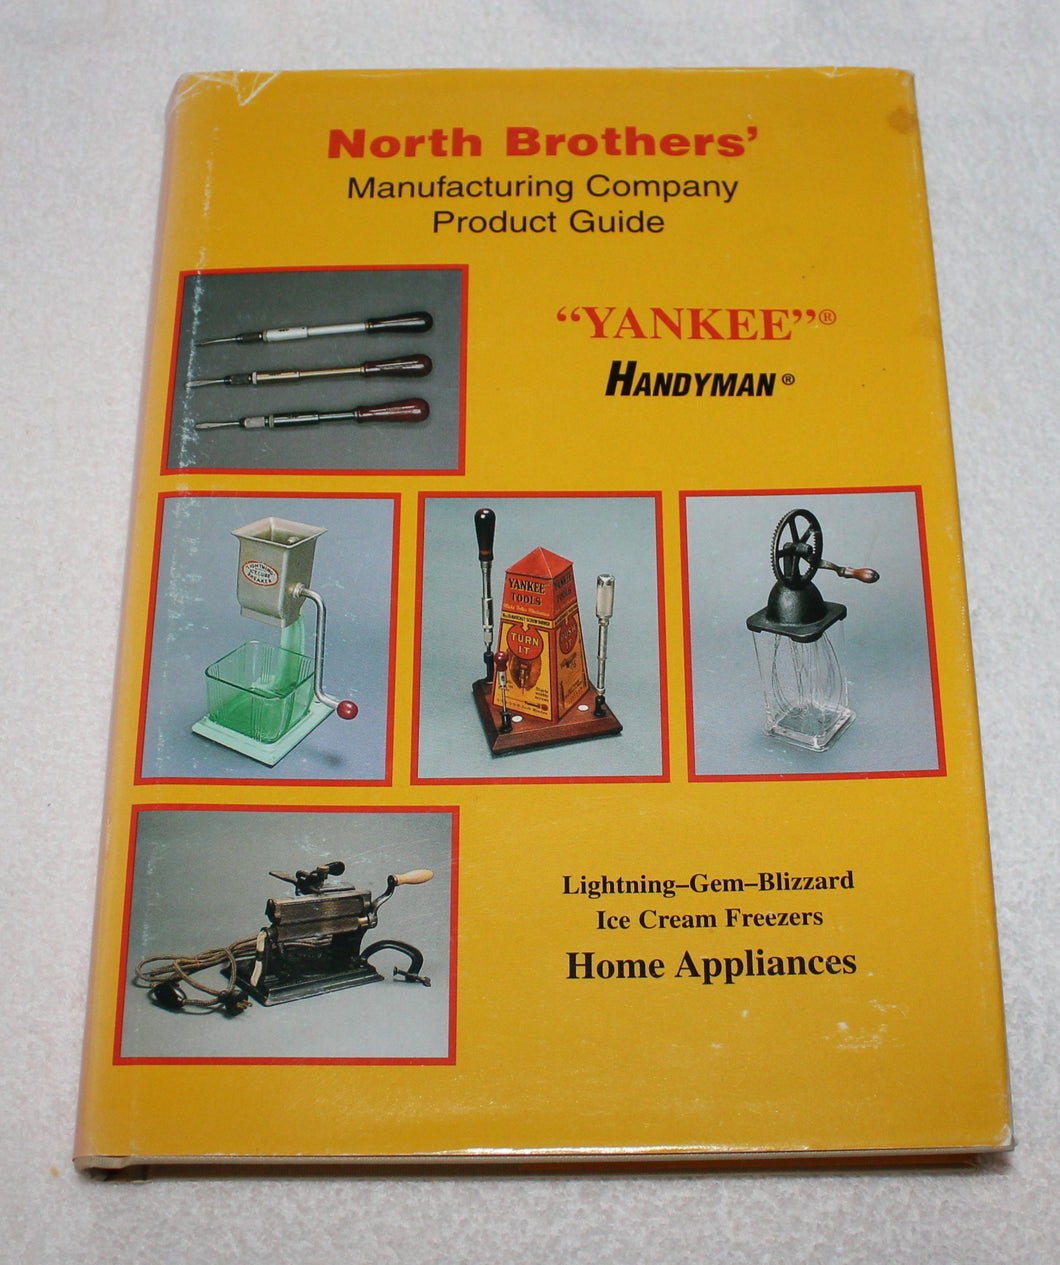 North Brothers’ Manufacturing Company Product Guide – Hard to Find Book